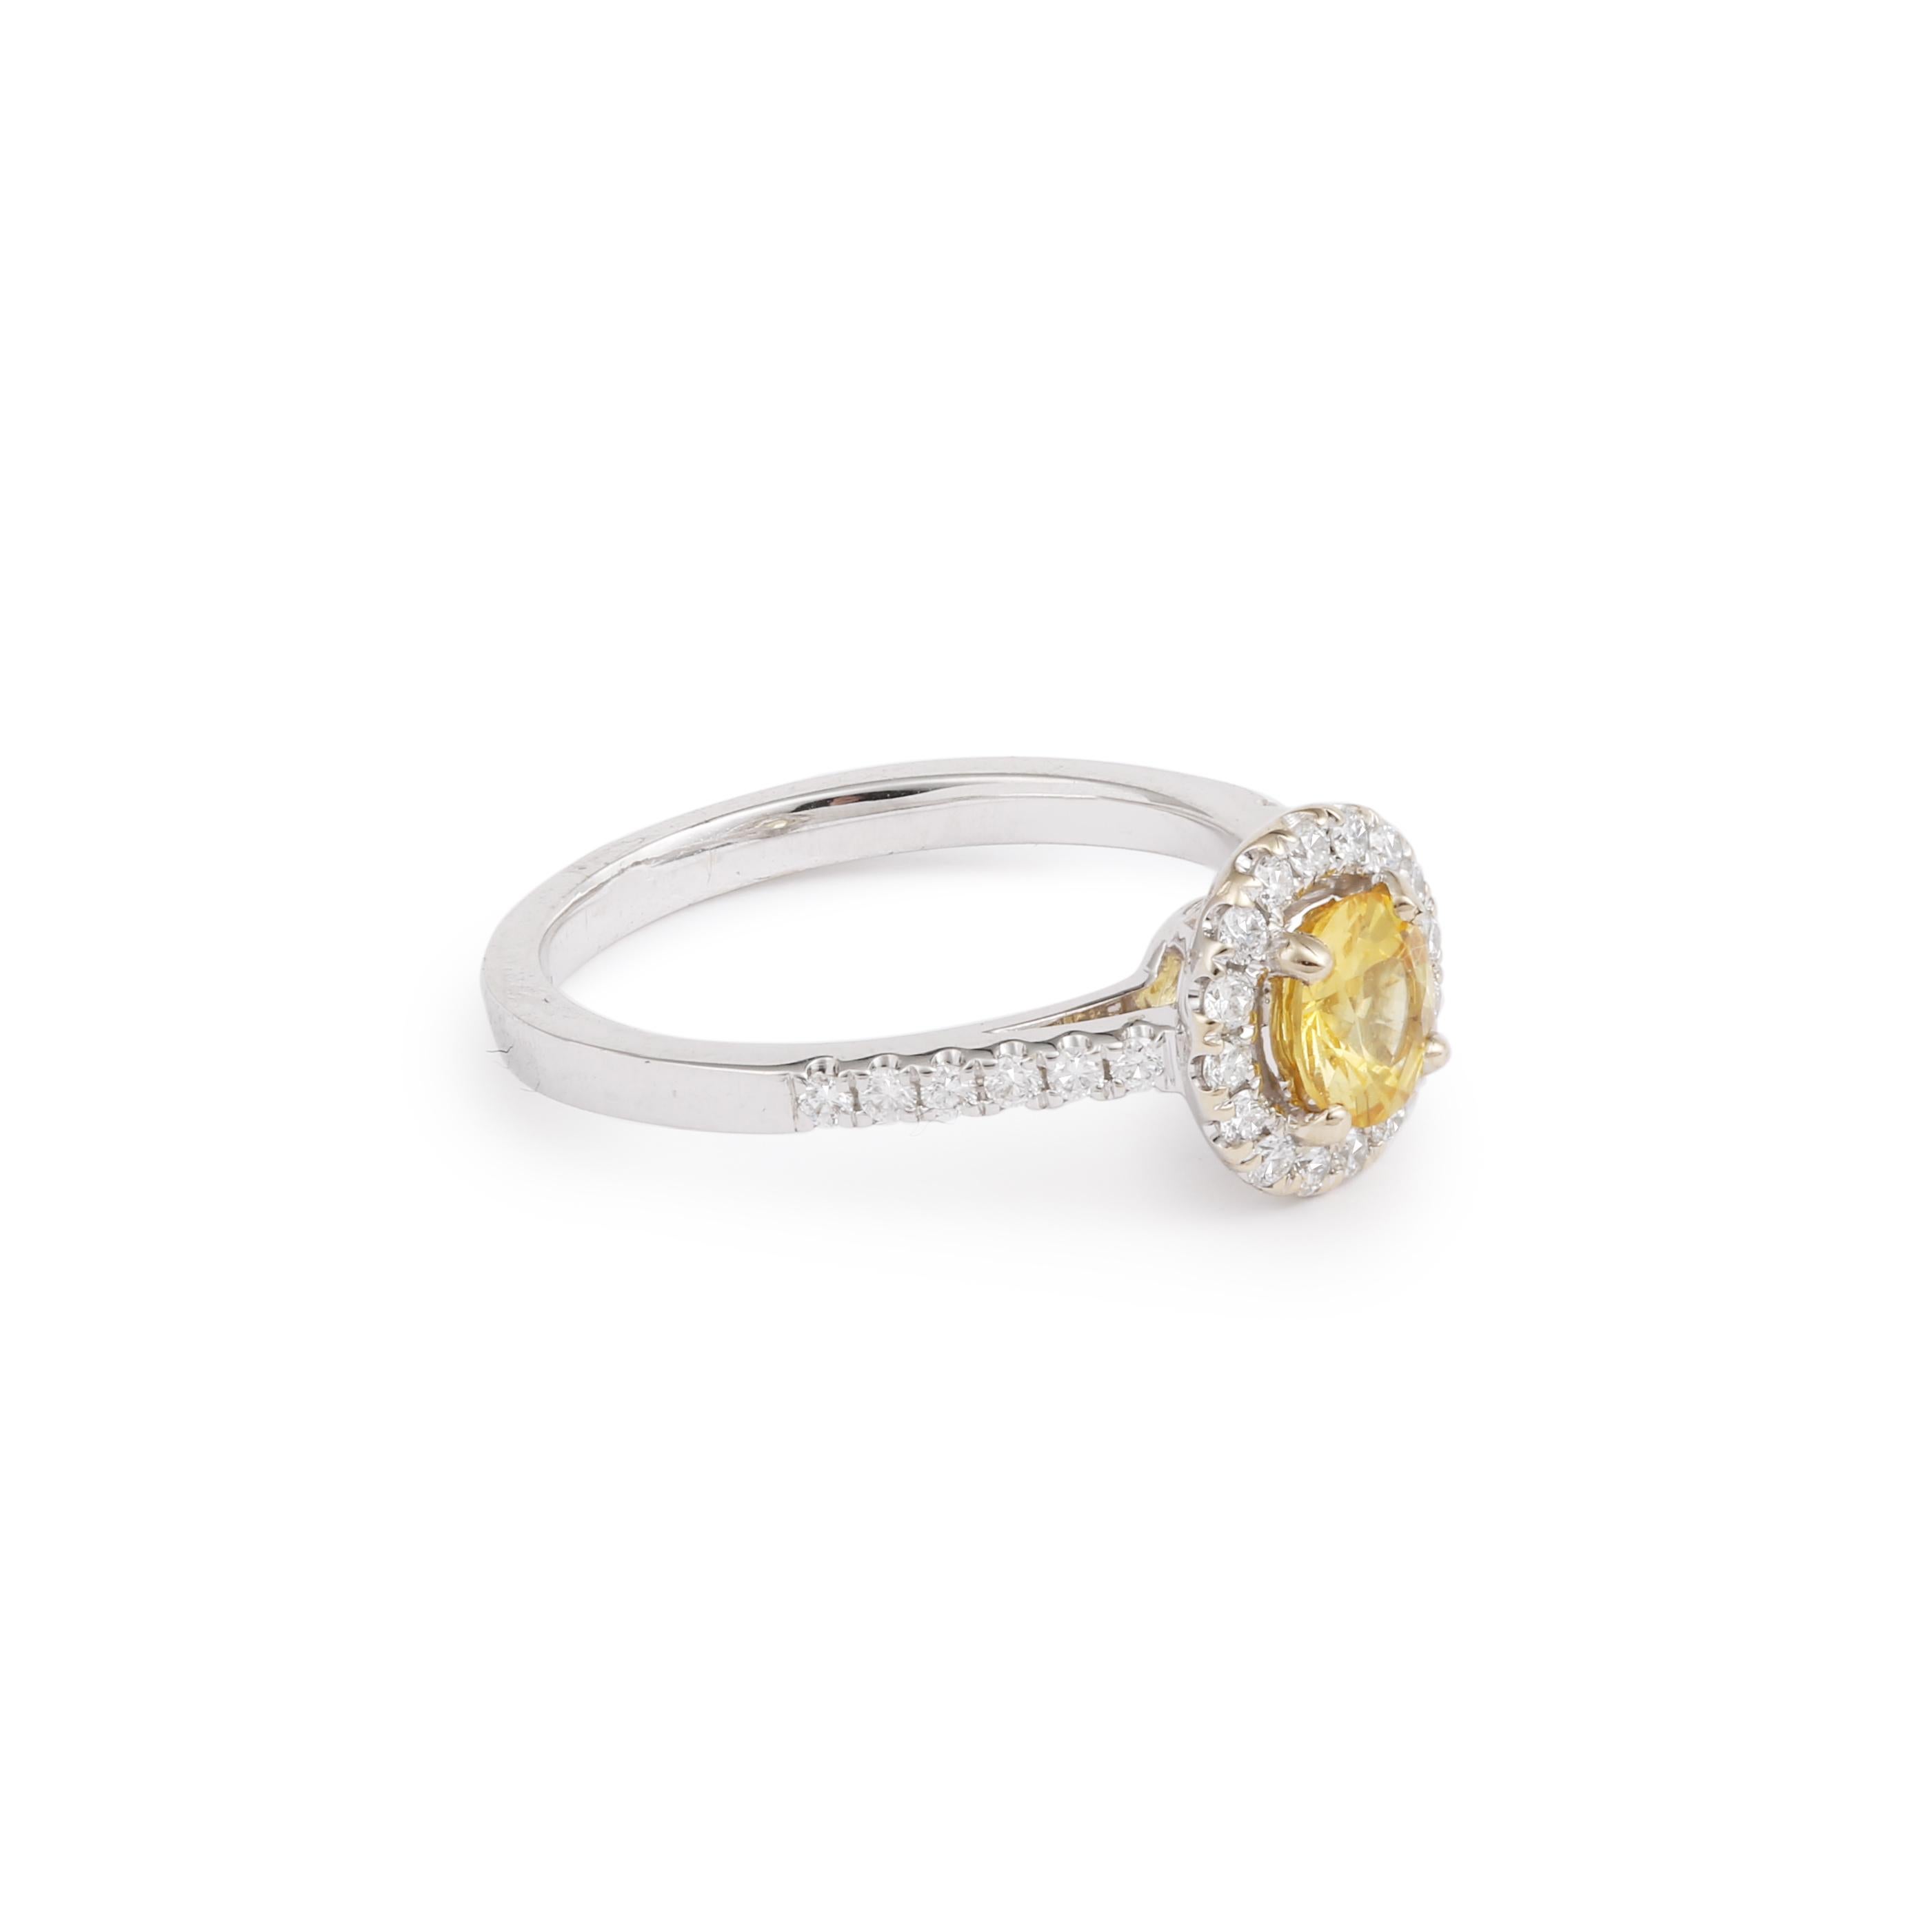 Delicate daisy ring set with a 0.67 ct brilliant-cut yellow sapphire surrounded by pavé-cut diamonds.

One of a kind piece. Ideal engagement ring!

Yellow sapphire weight : 0.67 carats

Pave diamond weight: 0.28 carats

Dimensions: 18.82 x 9.14 x 6